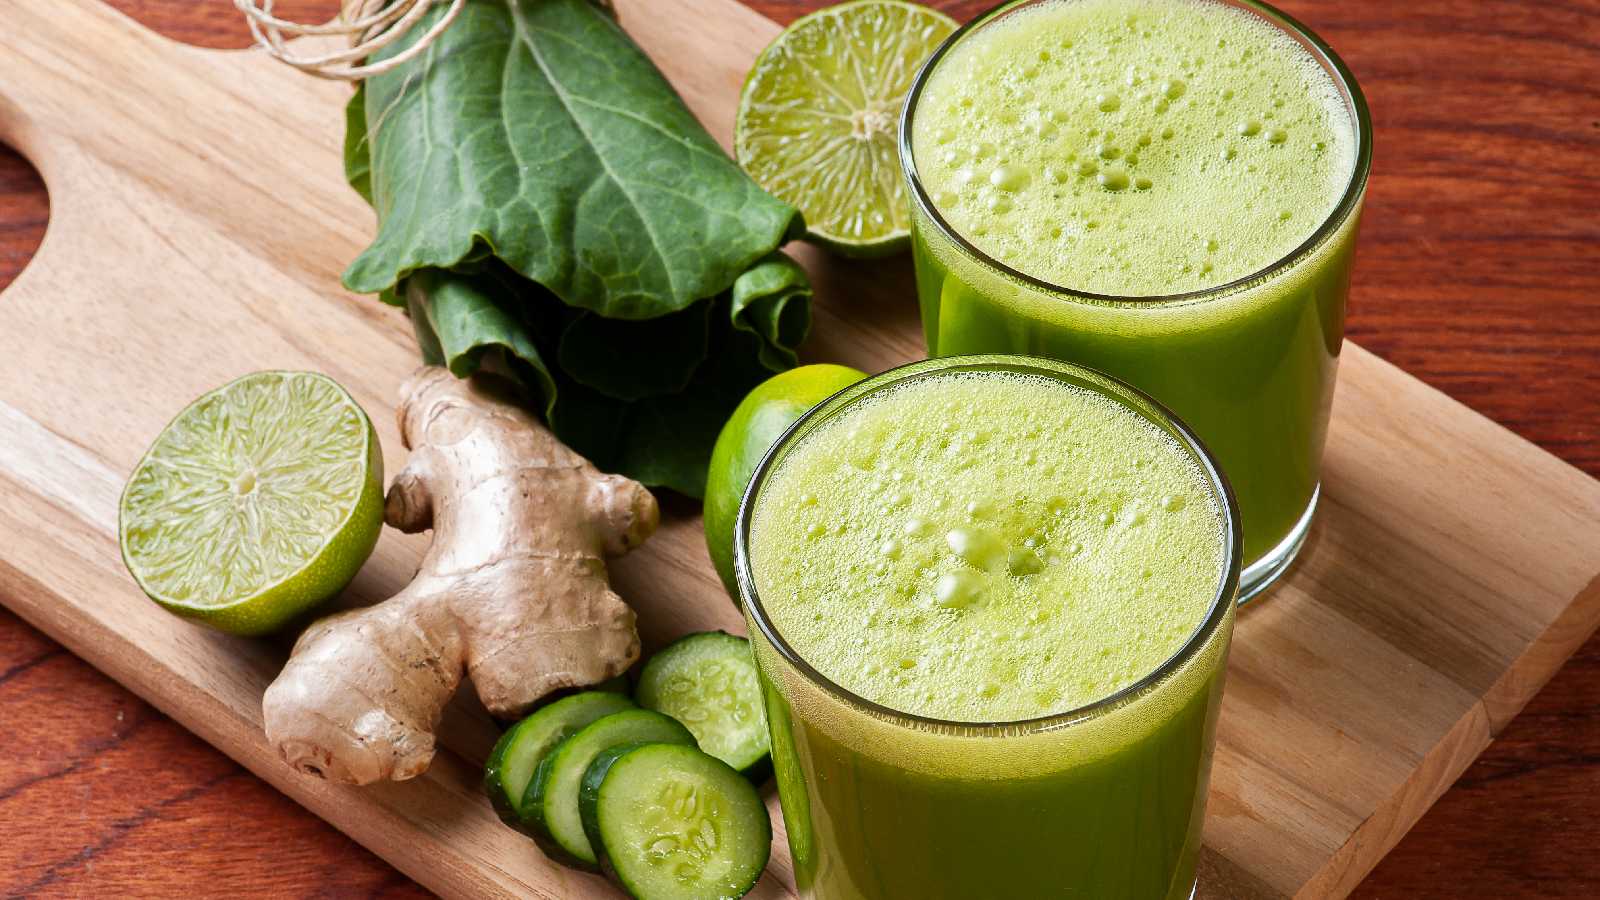 Cucumber ginger juice: Healthy drink for weight loss